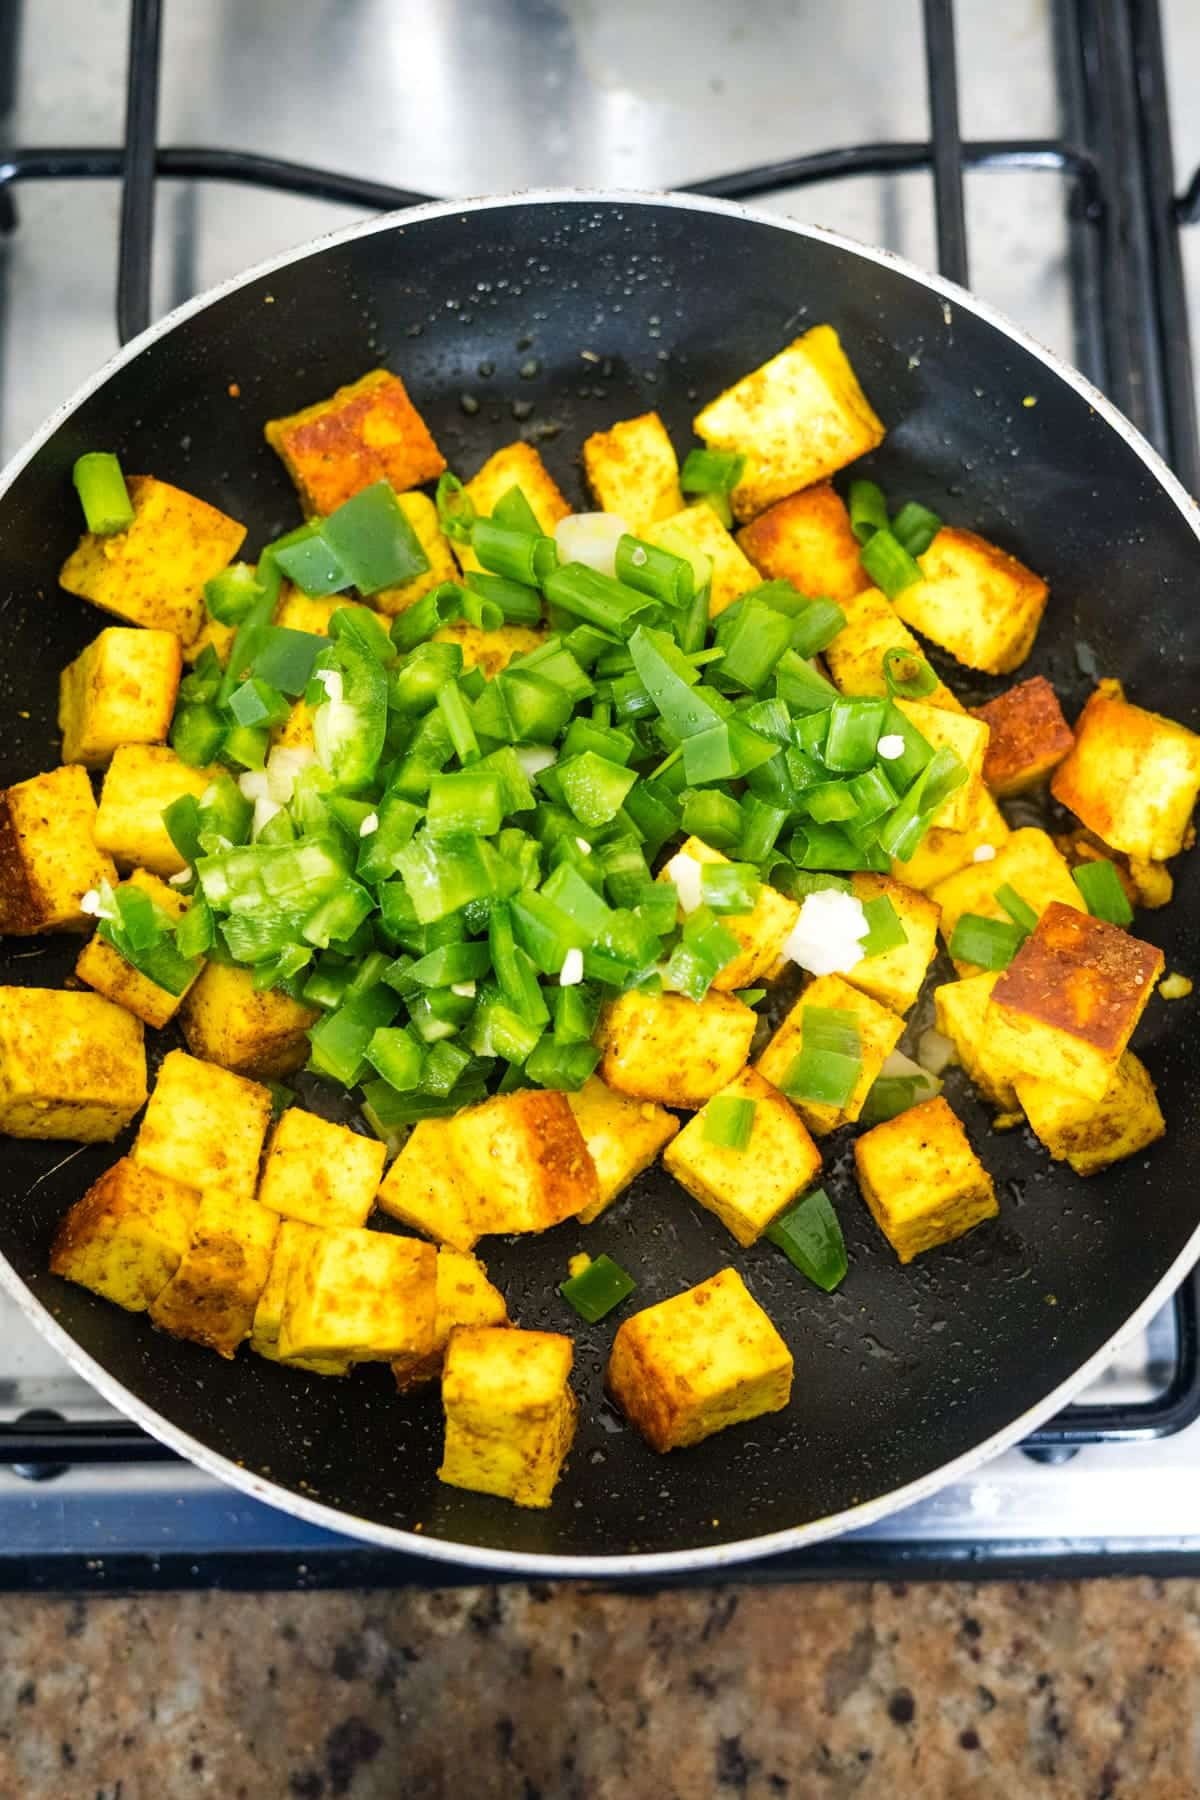 Tofu in a frying pan with green onions.